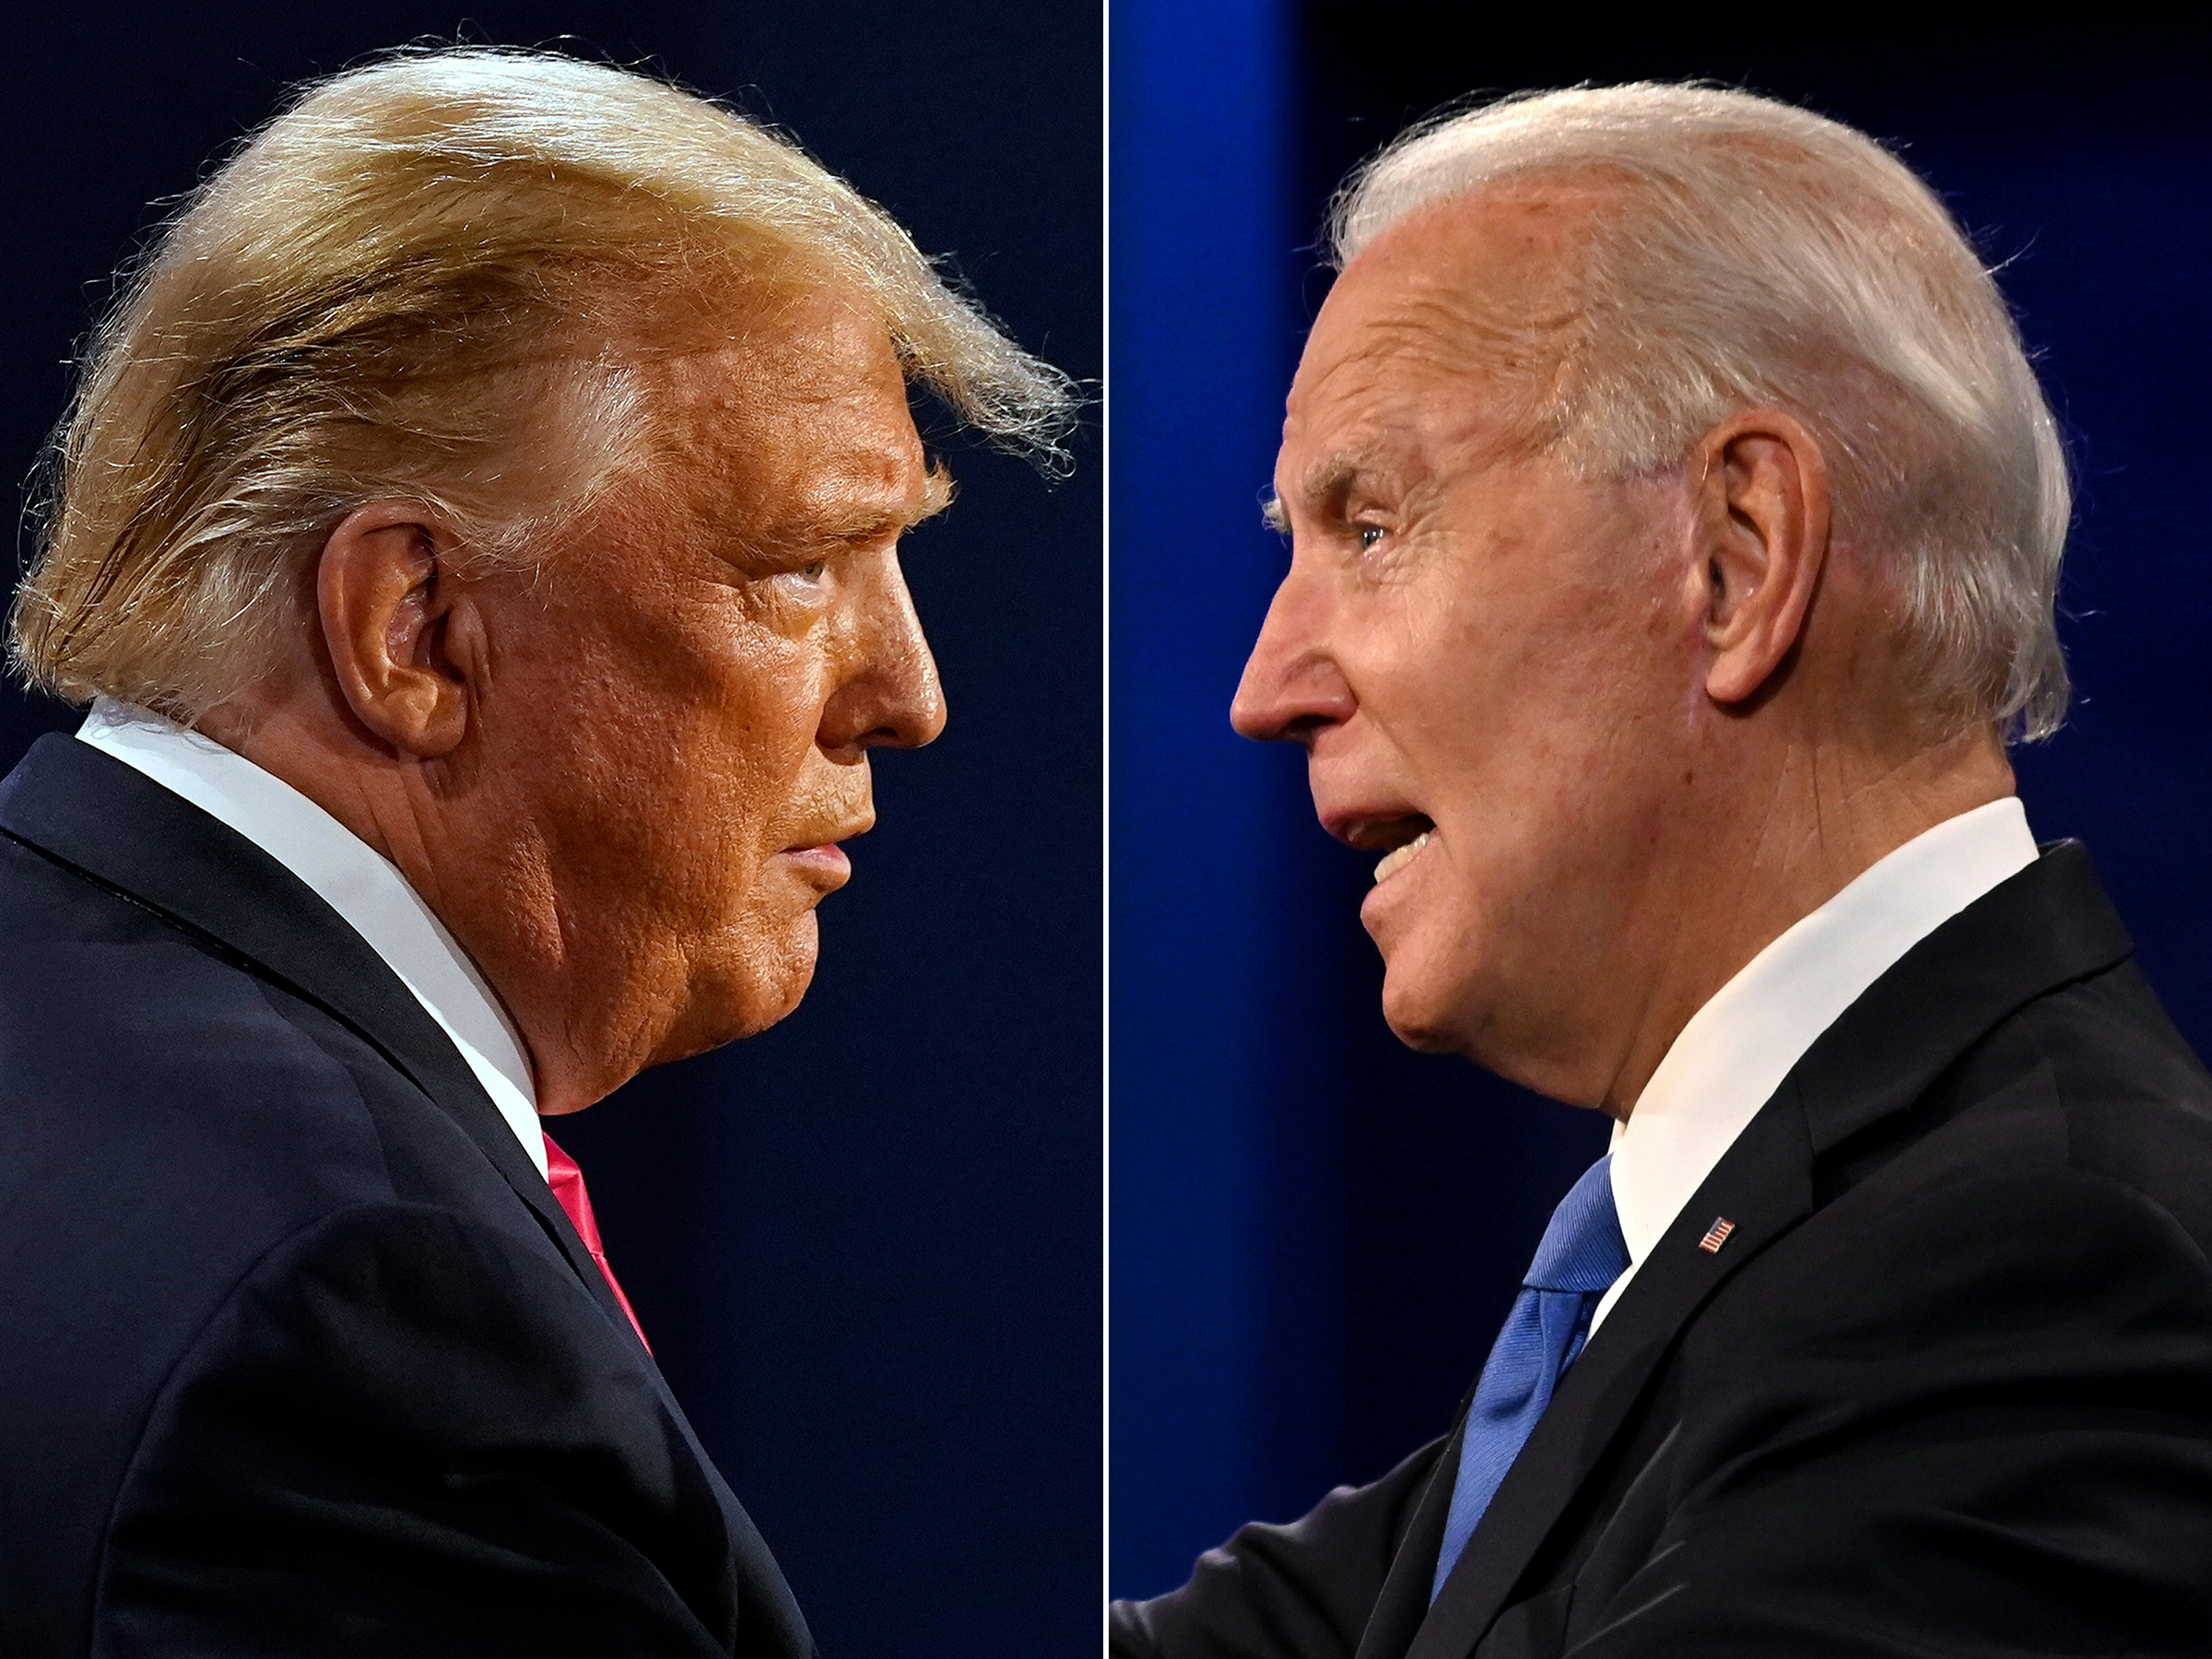 Former Former U.S. President Donald Trump and President Joe Biden during the final presidential debate at Belmont University in Nashville, Tennessee, on October 22, 2020. (Morry Gash—AFP/Getty Images; Jim Watson—AFP/Getty Images)